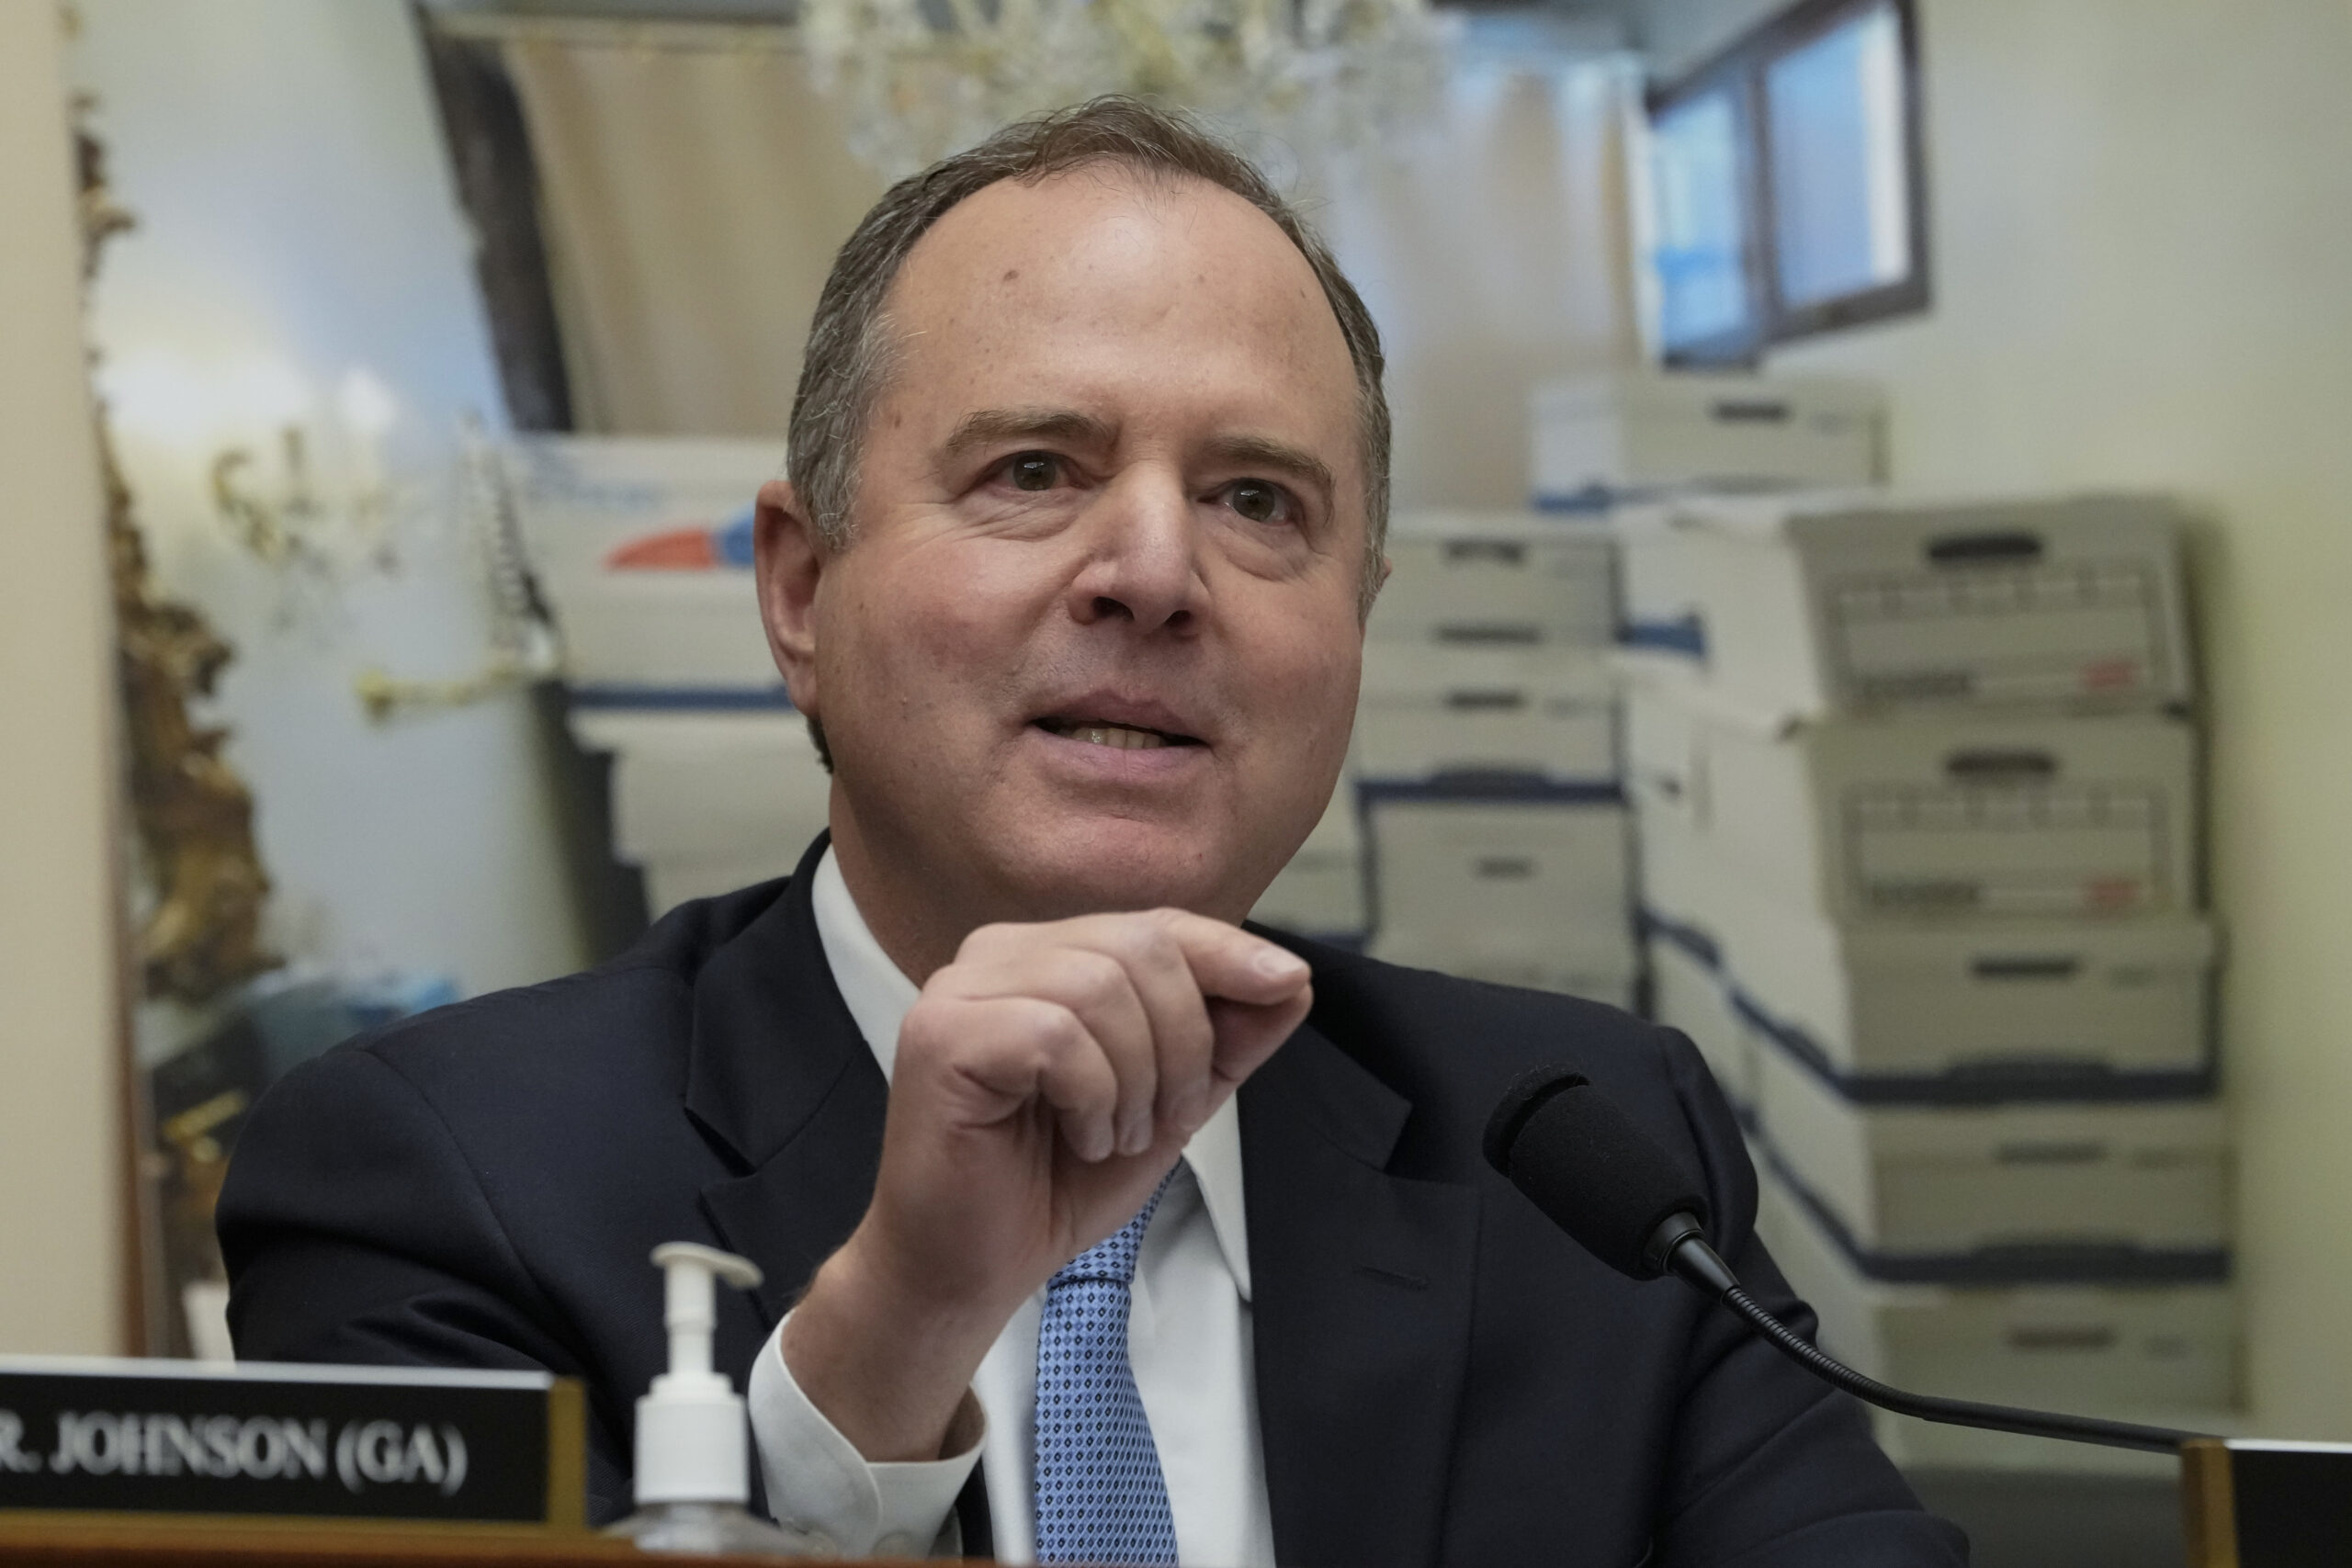 Schiff falls victim to crime in California hours before fundraiser: ‘Welcome to San Francisco’ – Washington Examiner